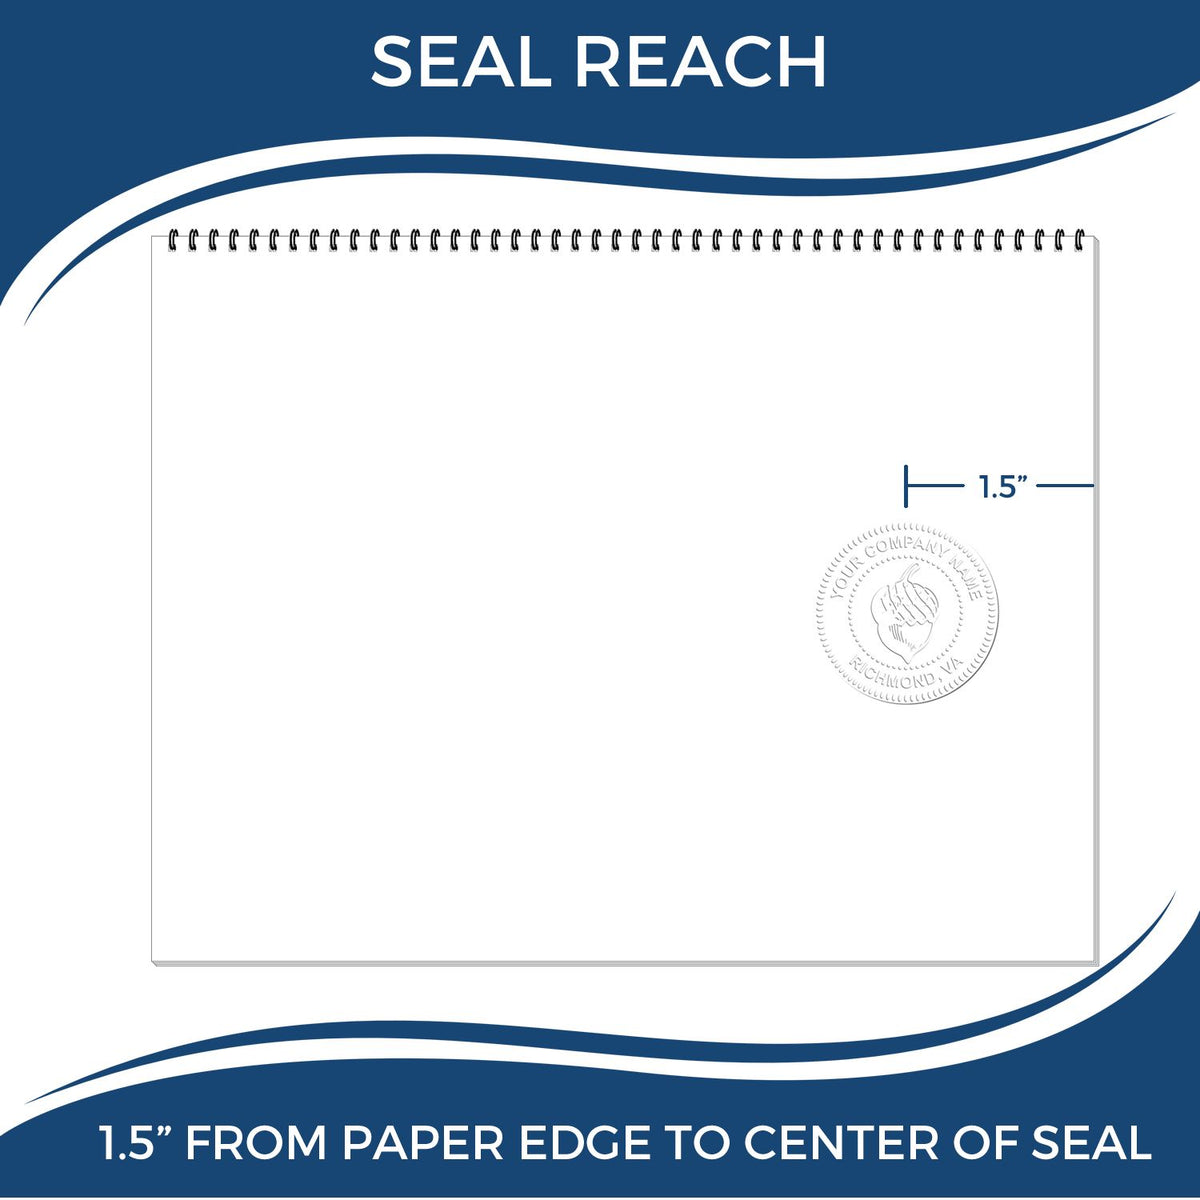 An infographic showing the seal reach which is represented by a ruler and a miniature seal image of the Gift Iowa Landscape Architect Seal